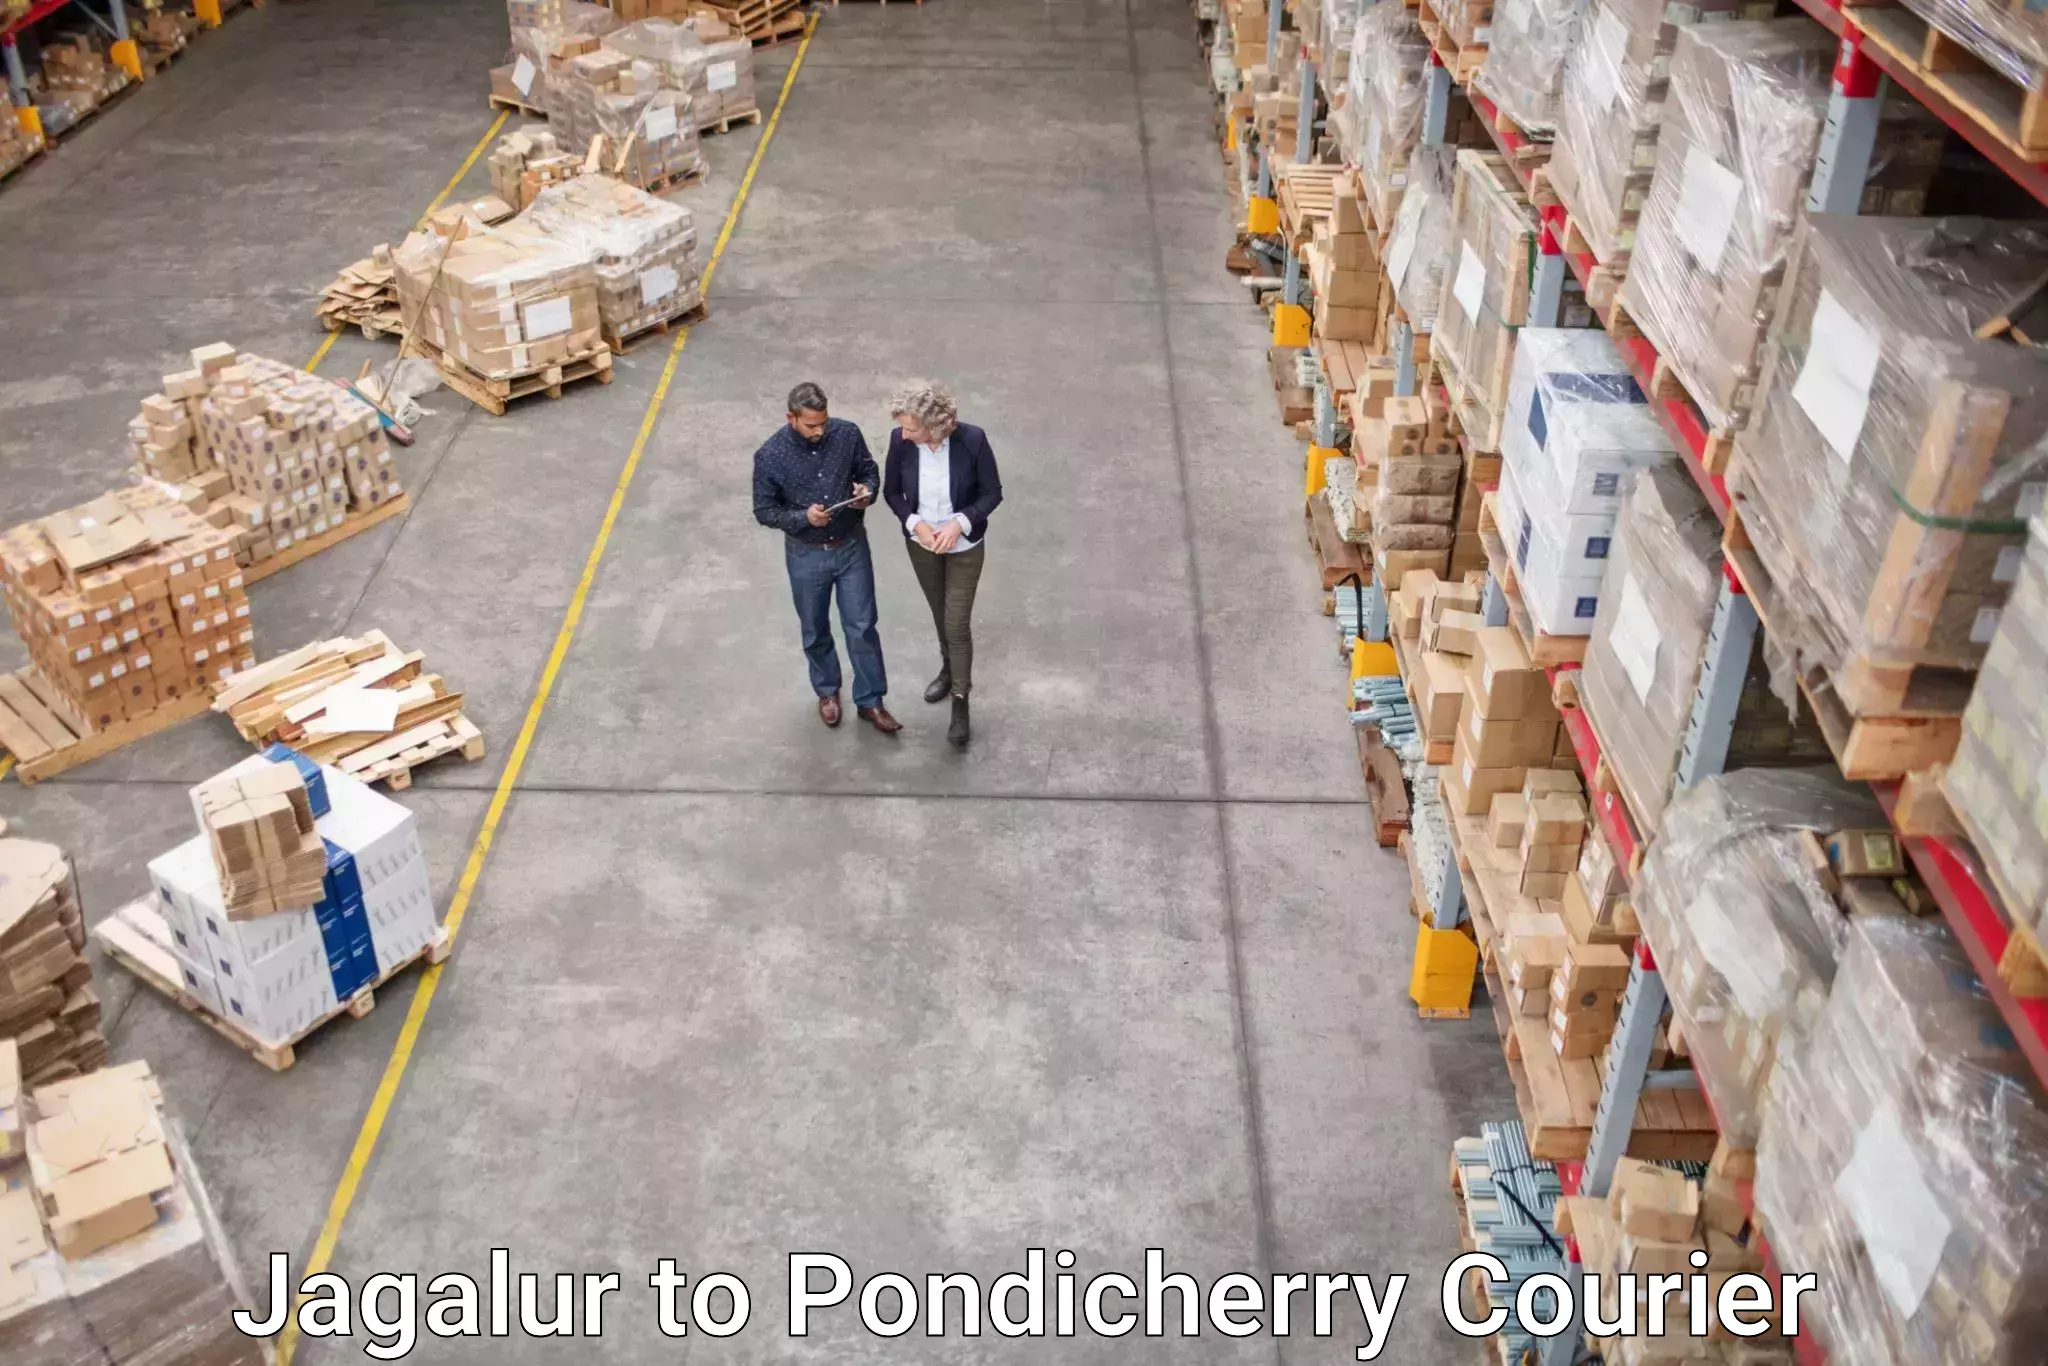 Customer-centric shipping in Jagalur to Pondicherry